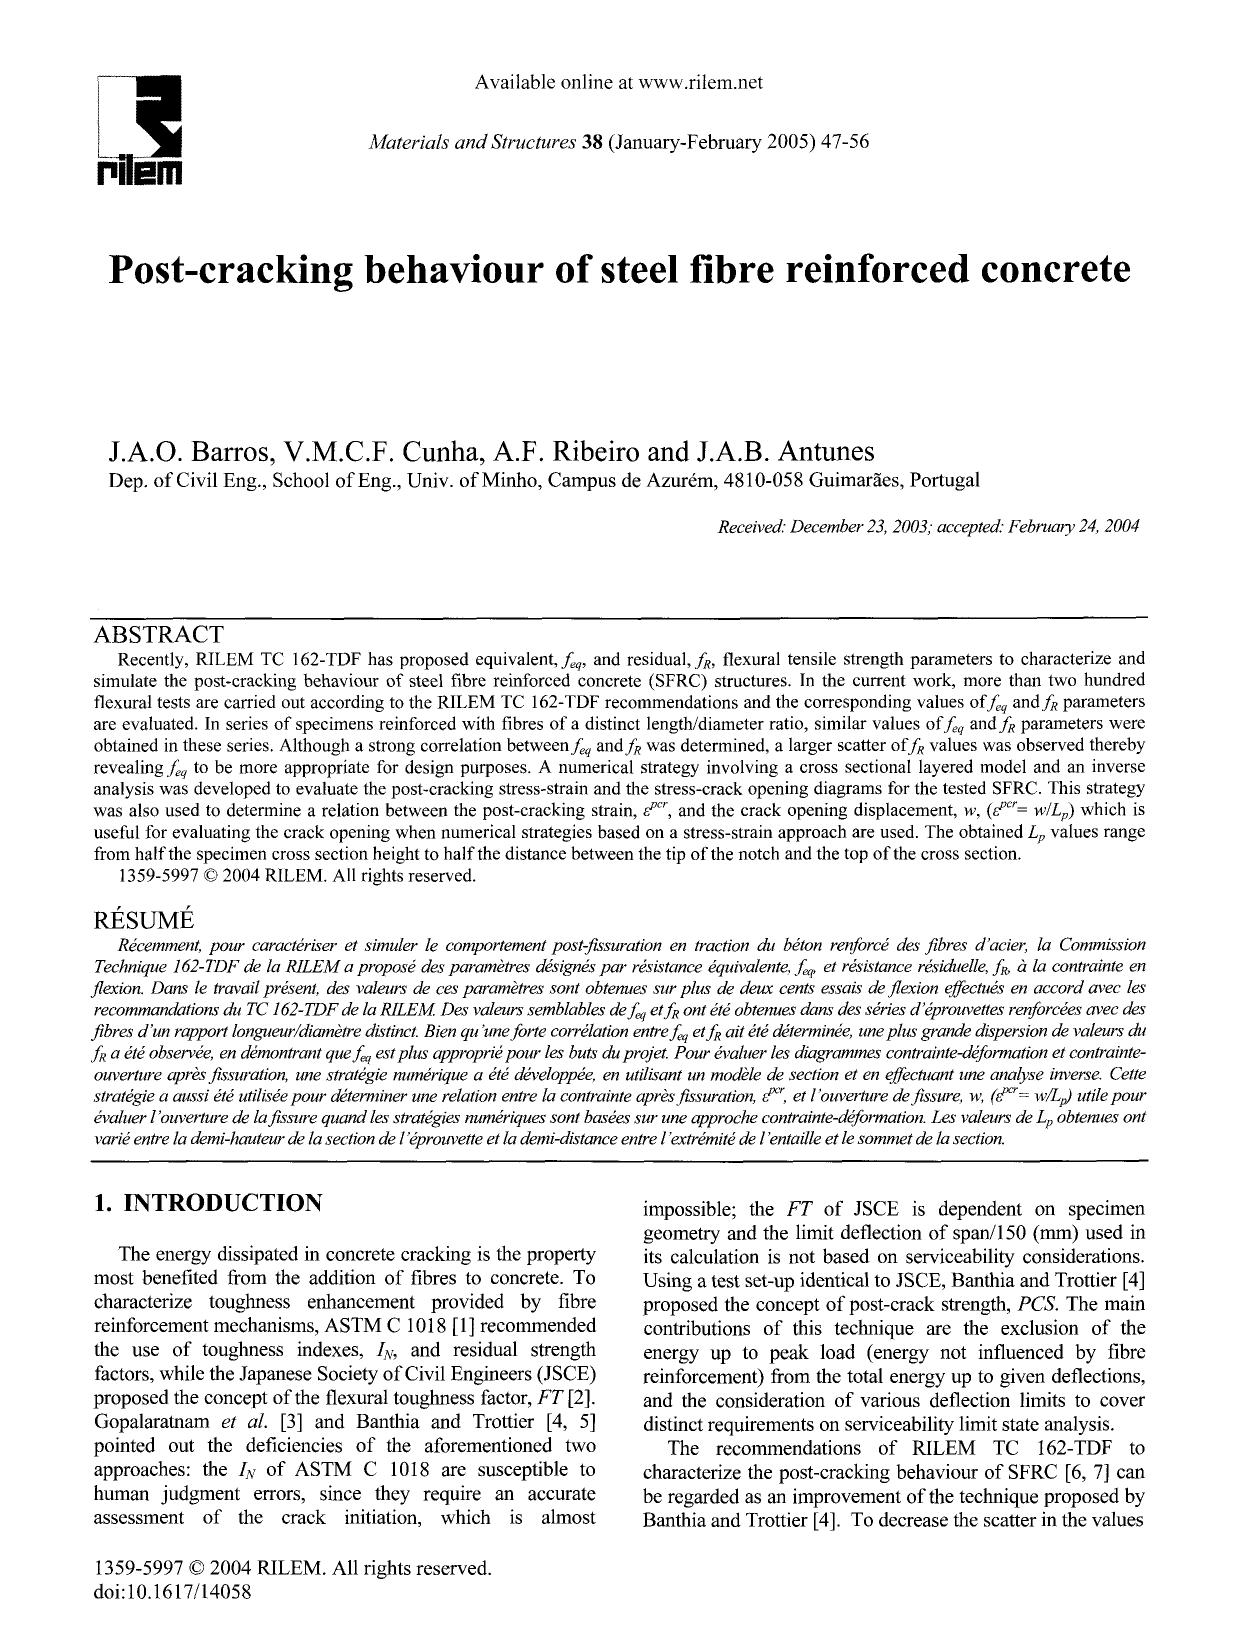 Post-cracking behaviour of steel fibre reinforced concrete by Unknown